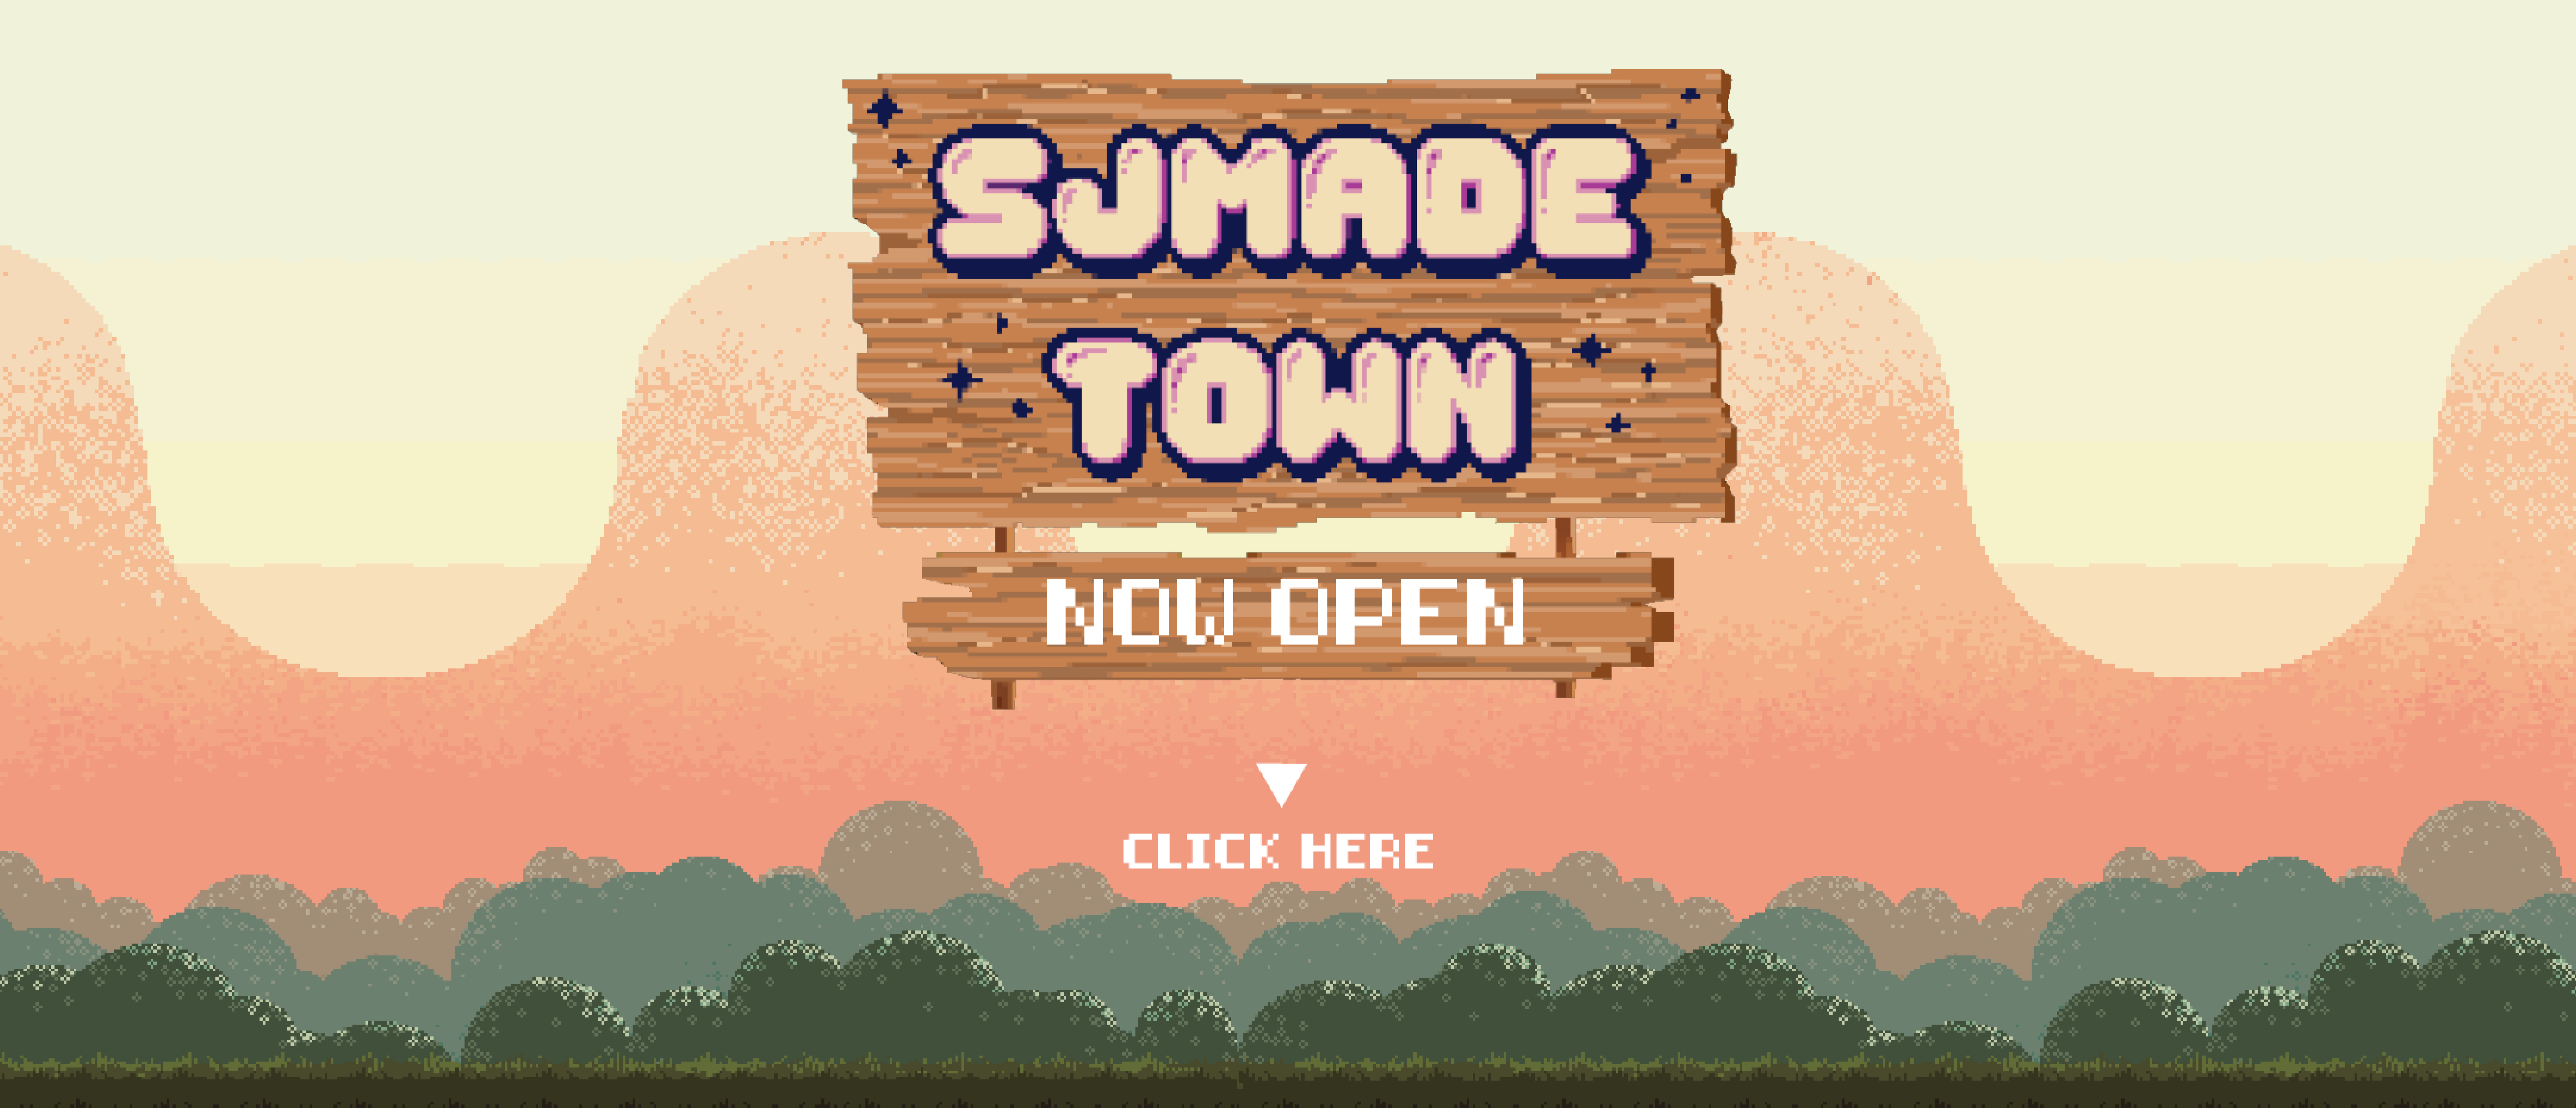 SJMADE Town